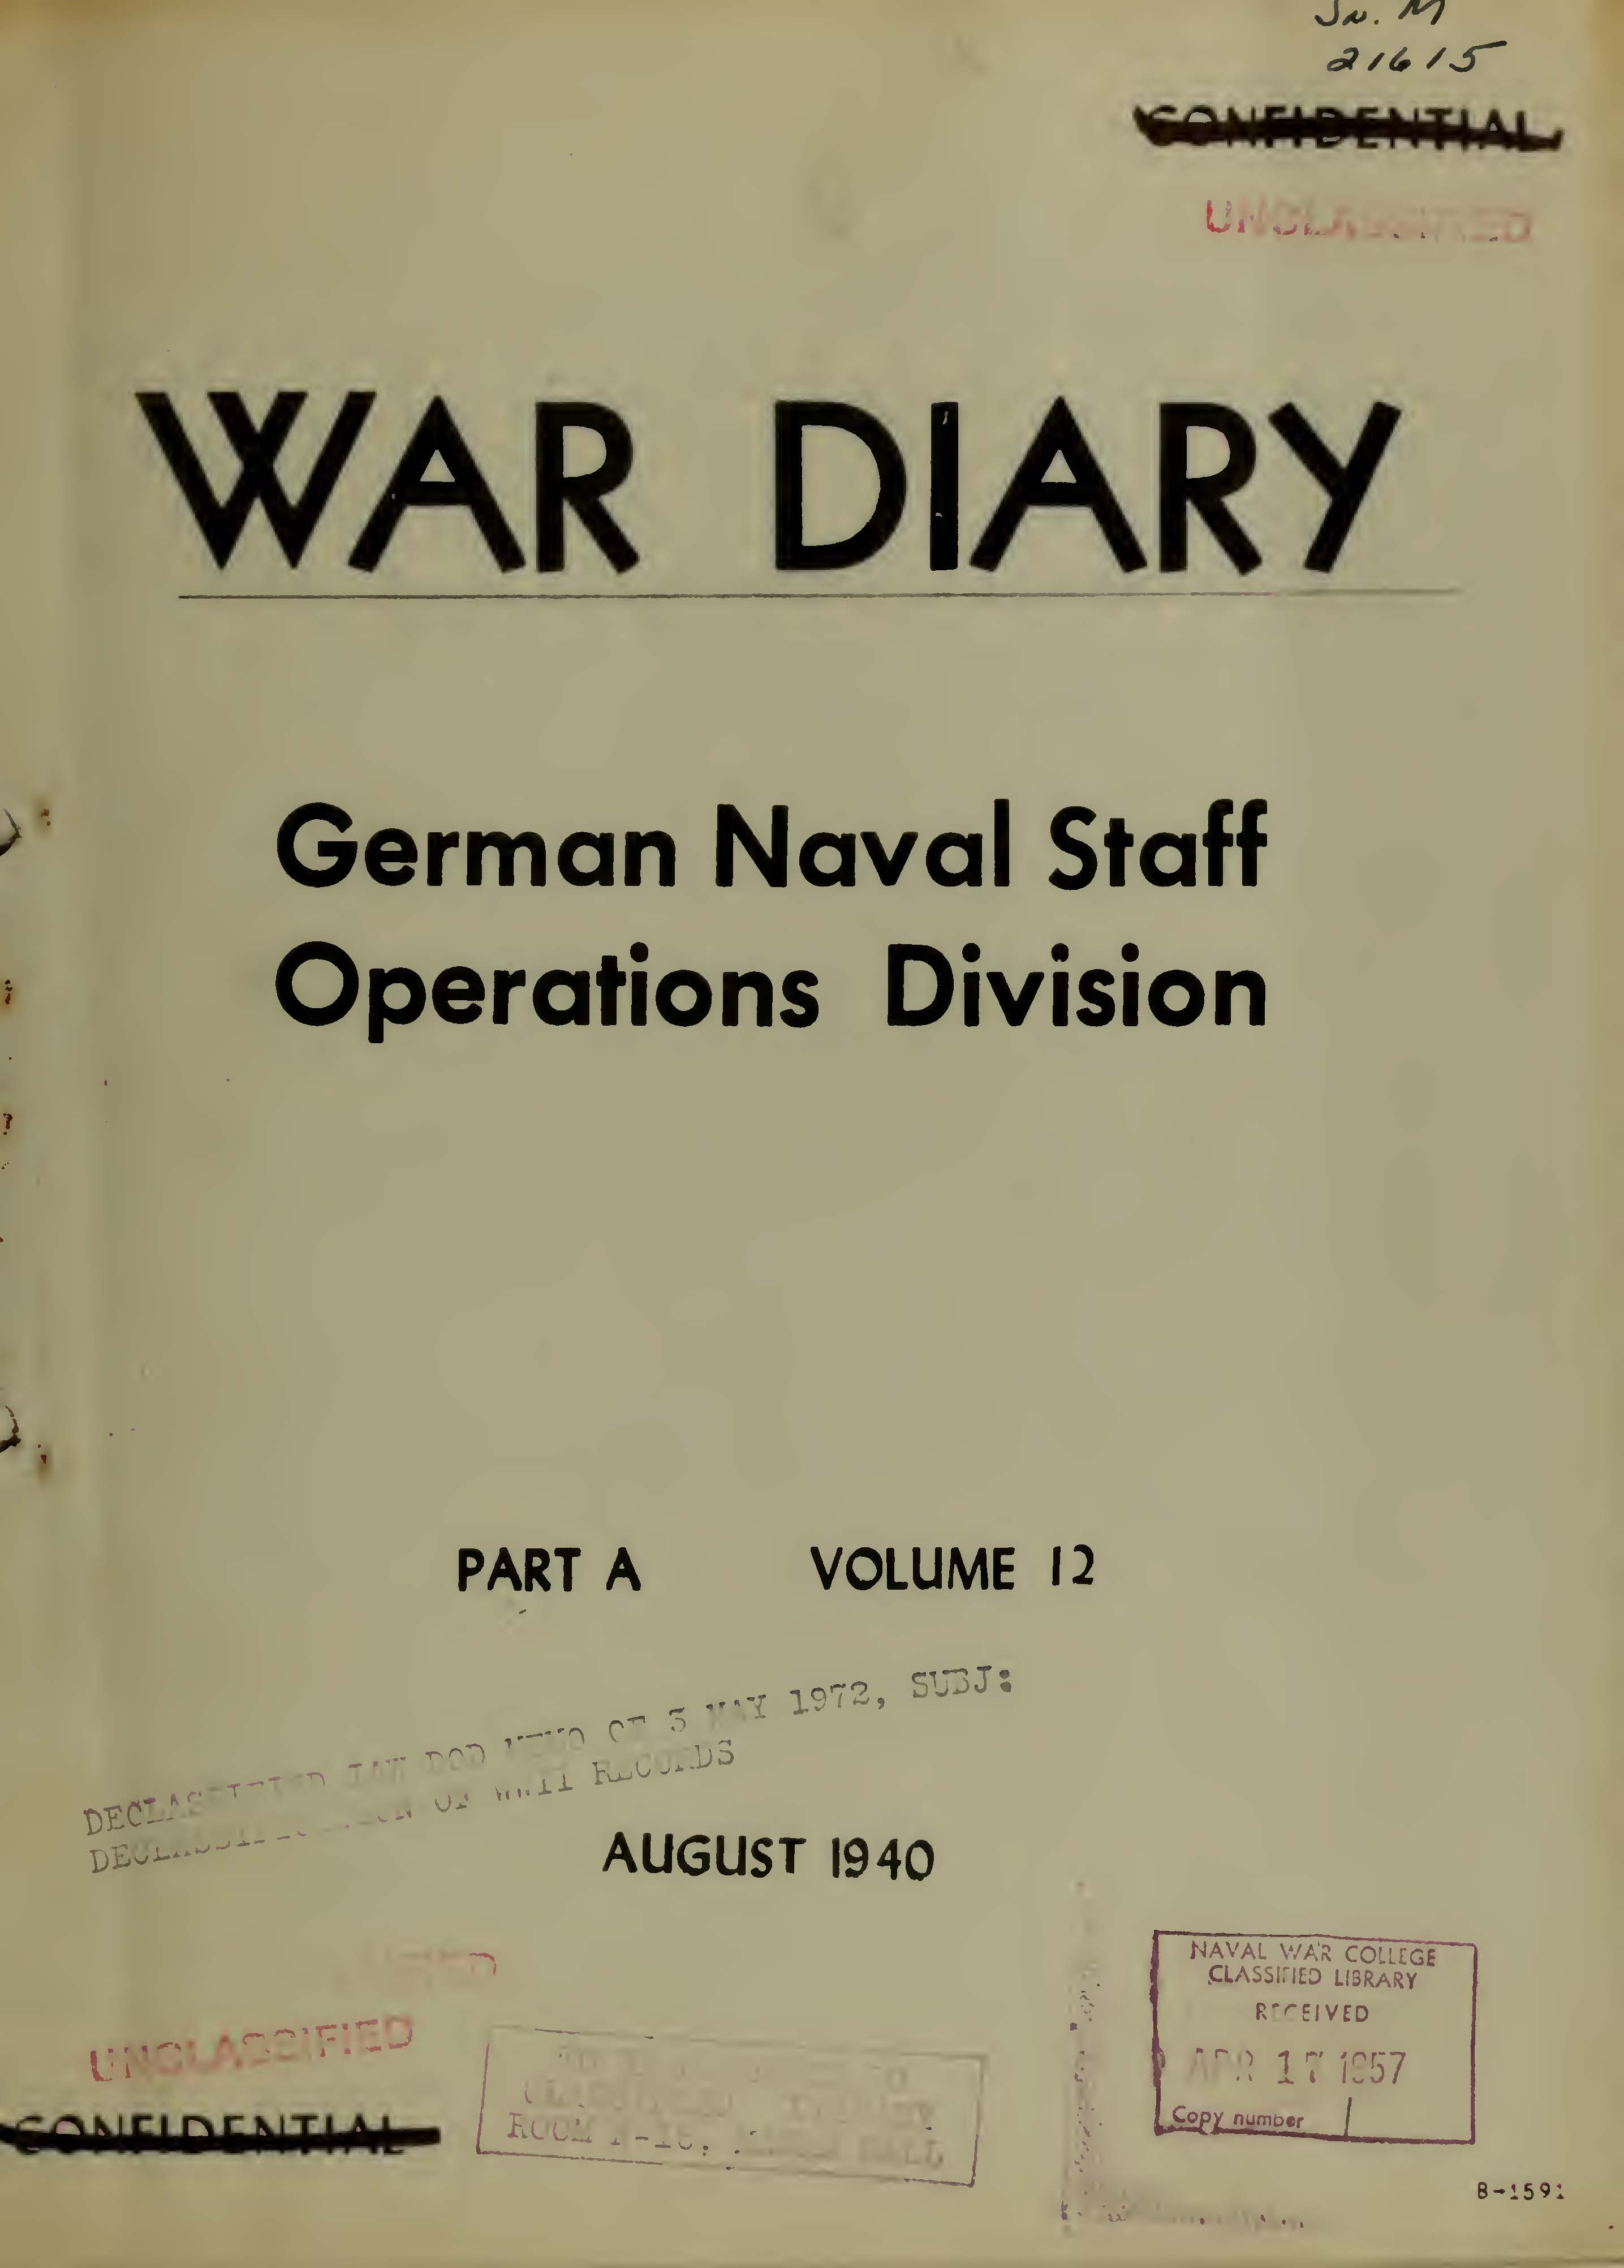 War Diary of German Naval Staff (Operations Division) Part A, Volume 12, August 1940